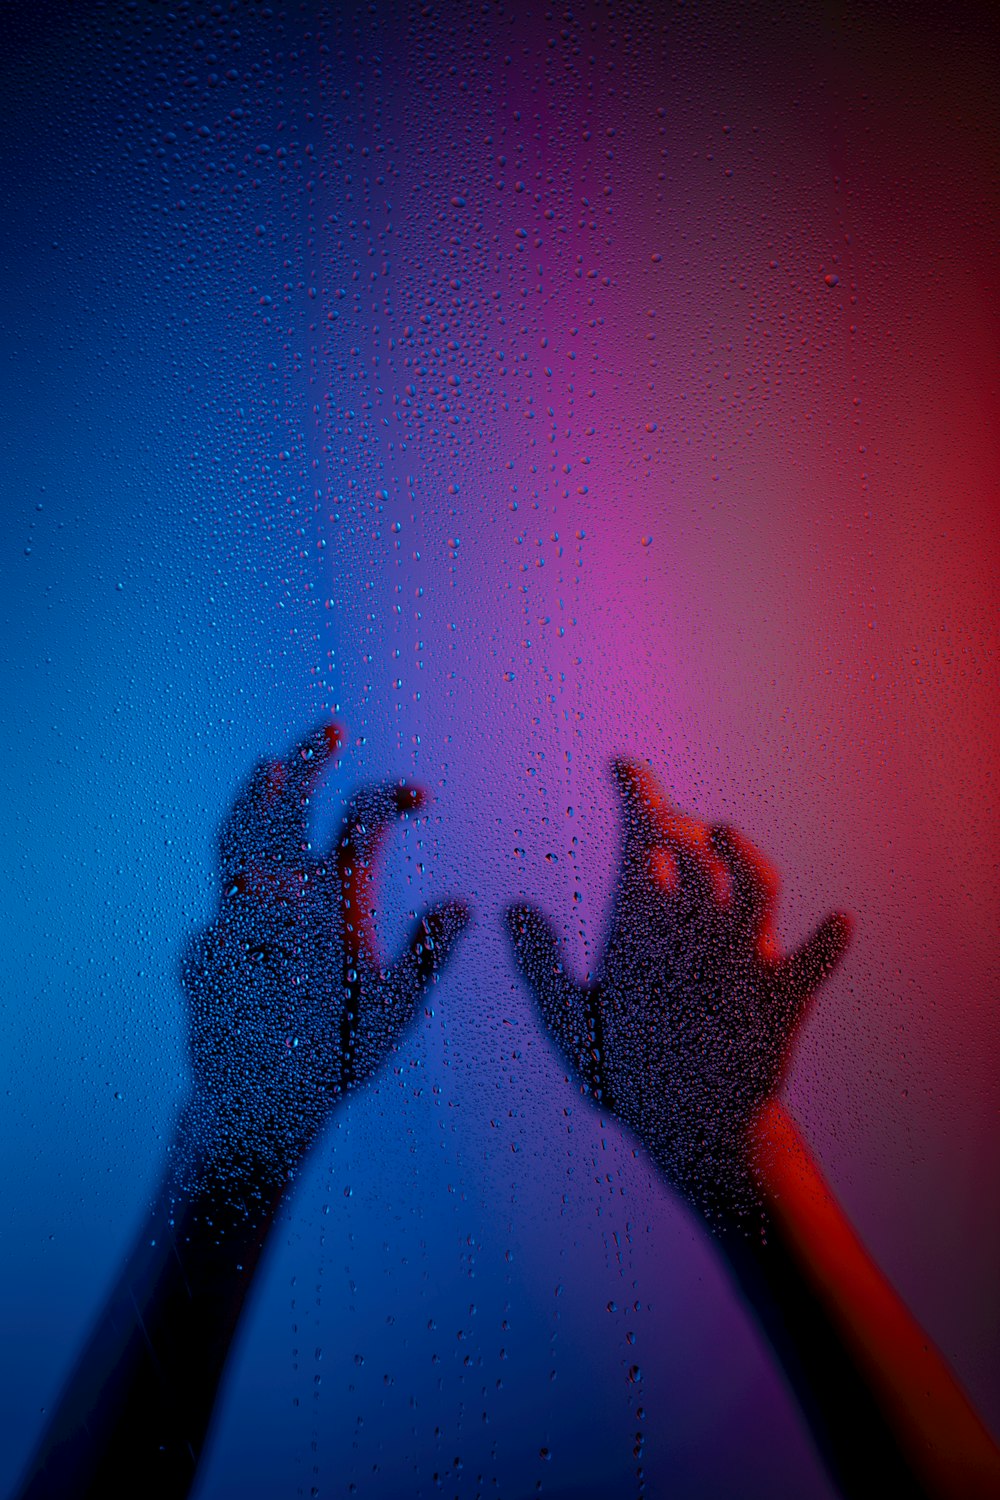 a person's hands are shown through a window